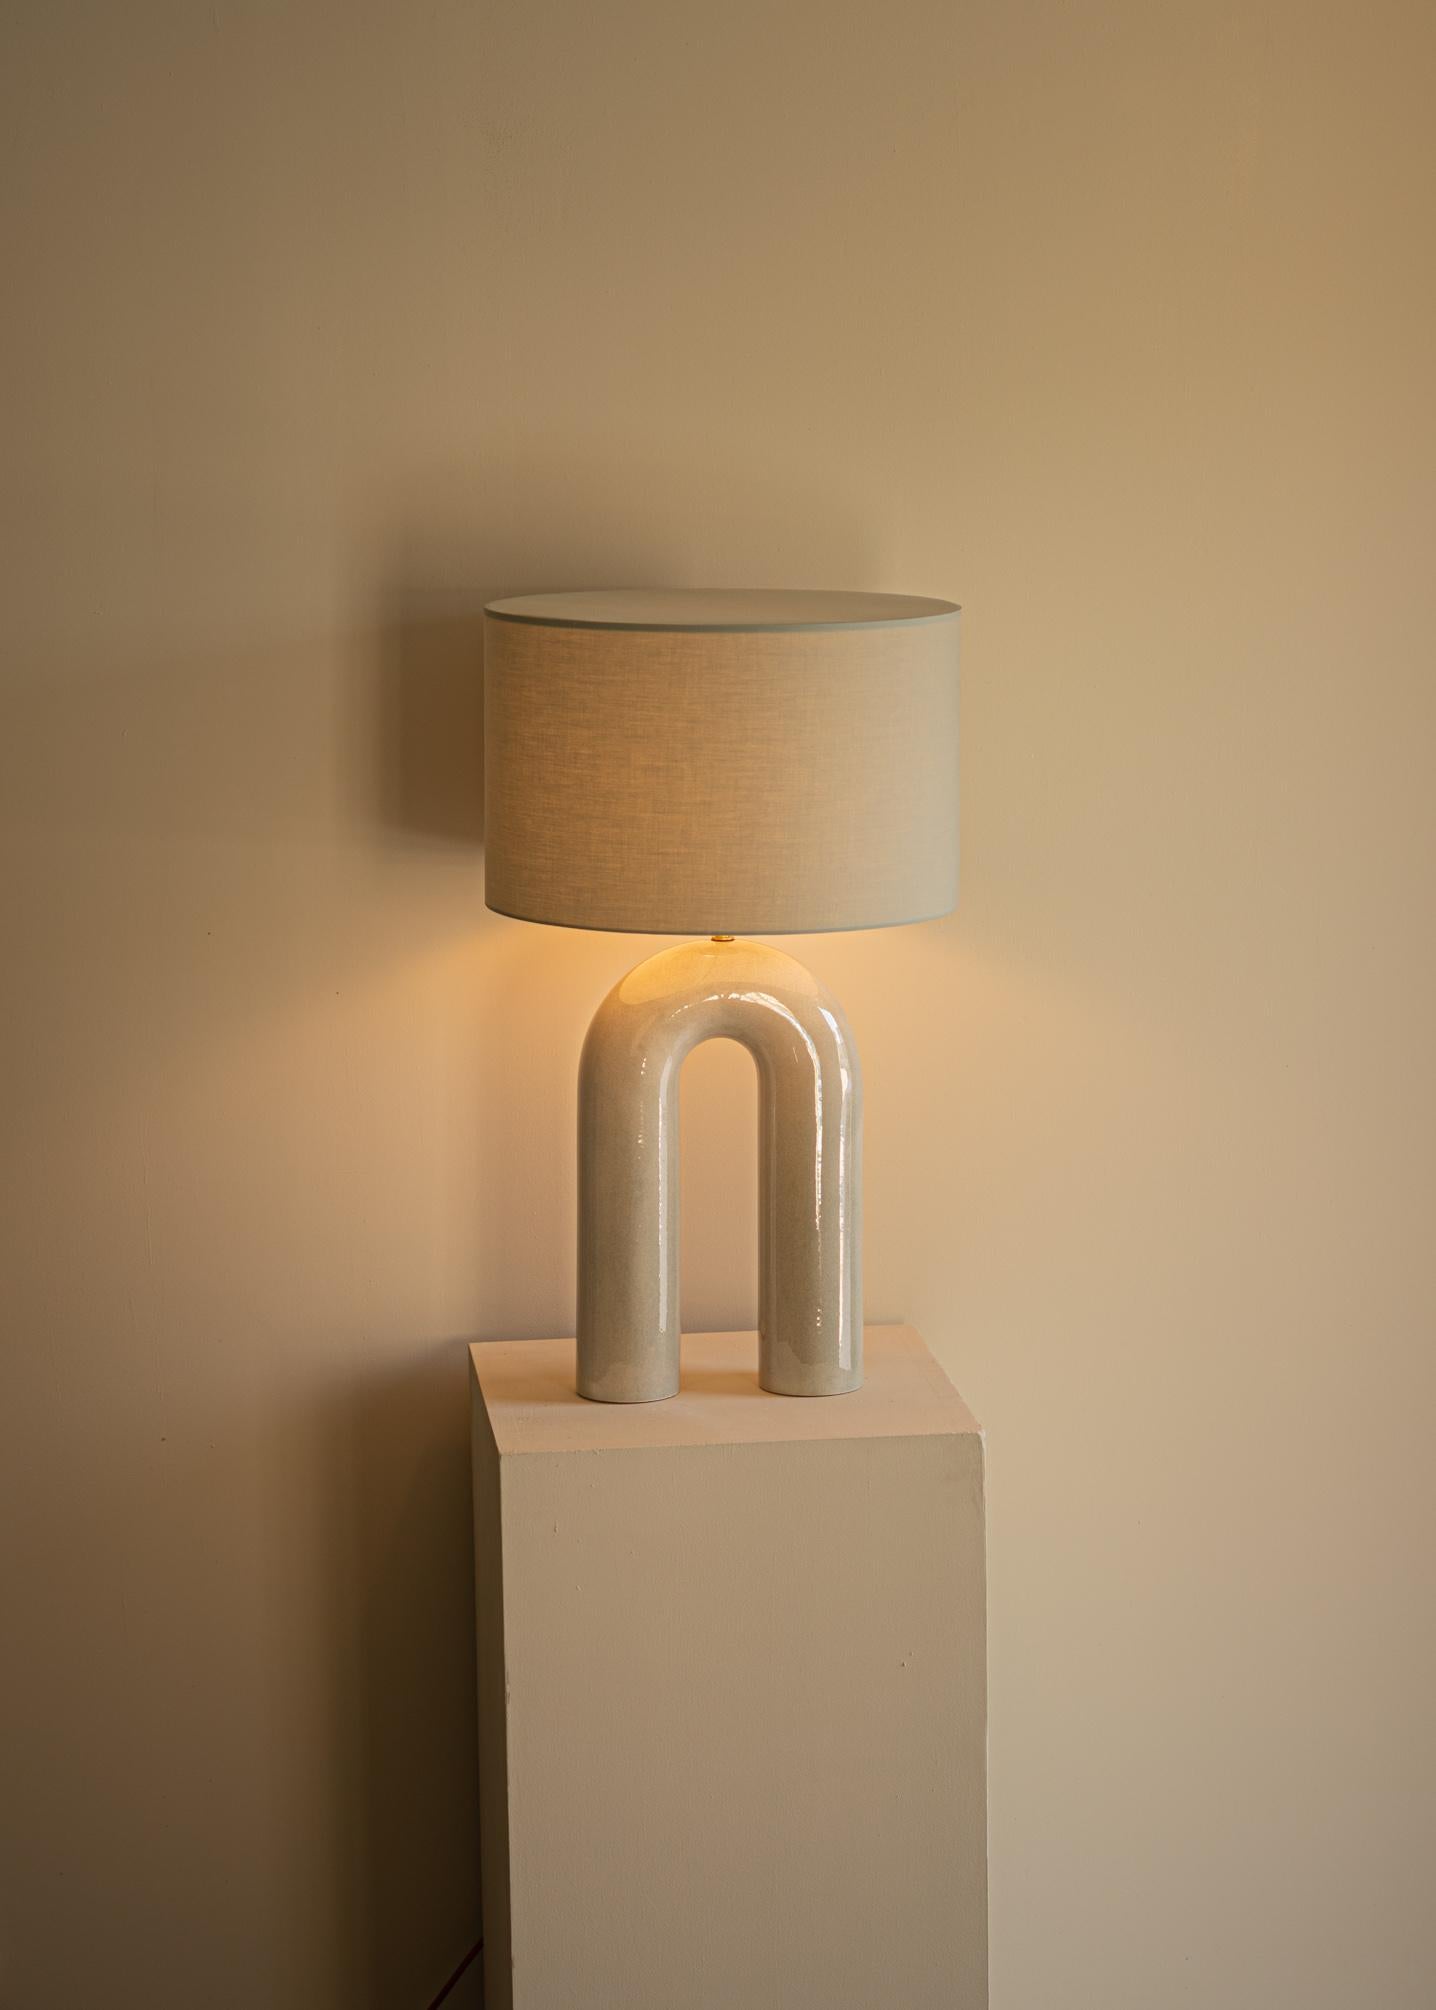 Sea Ceramic Arko Table Lamp with Light Brown Lampshade by Simone & Marcel
Dimensions: Ø 40 x H 67 cm.
Materials: Cotton lampshade and ceramic.

Also available in different marbles and ceramics. Custom options available on request. Please contact us.